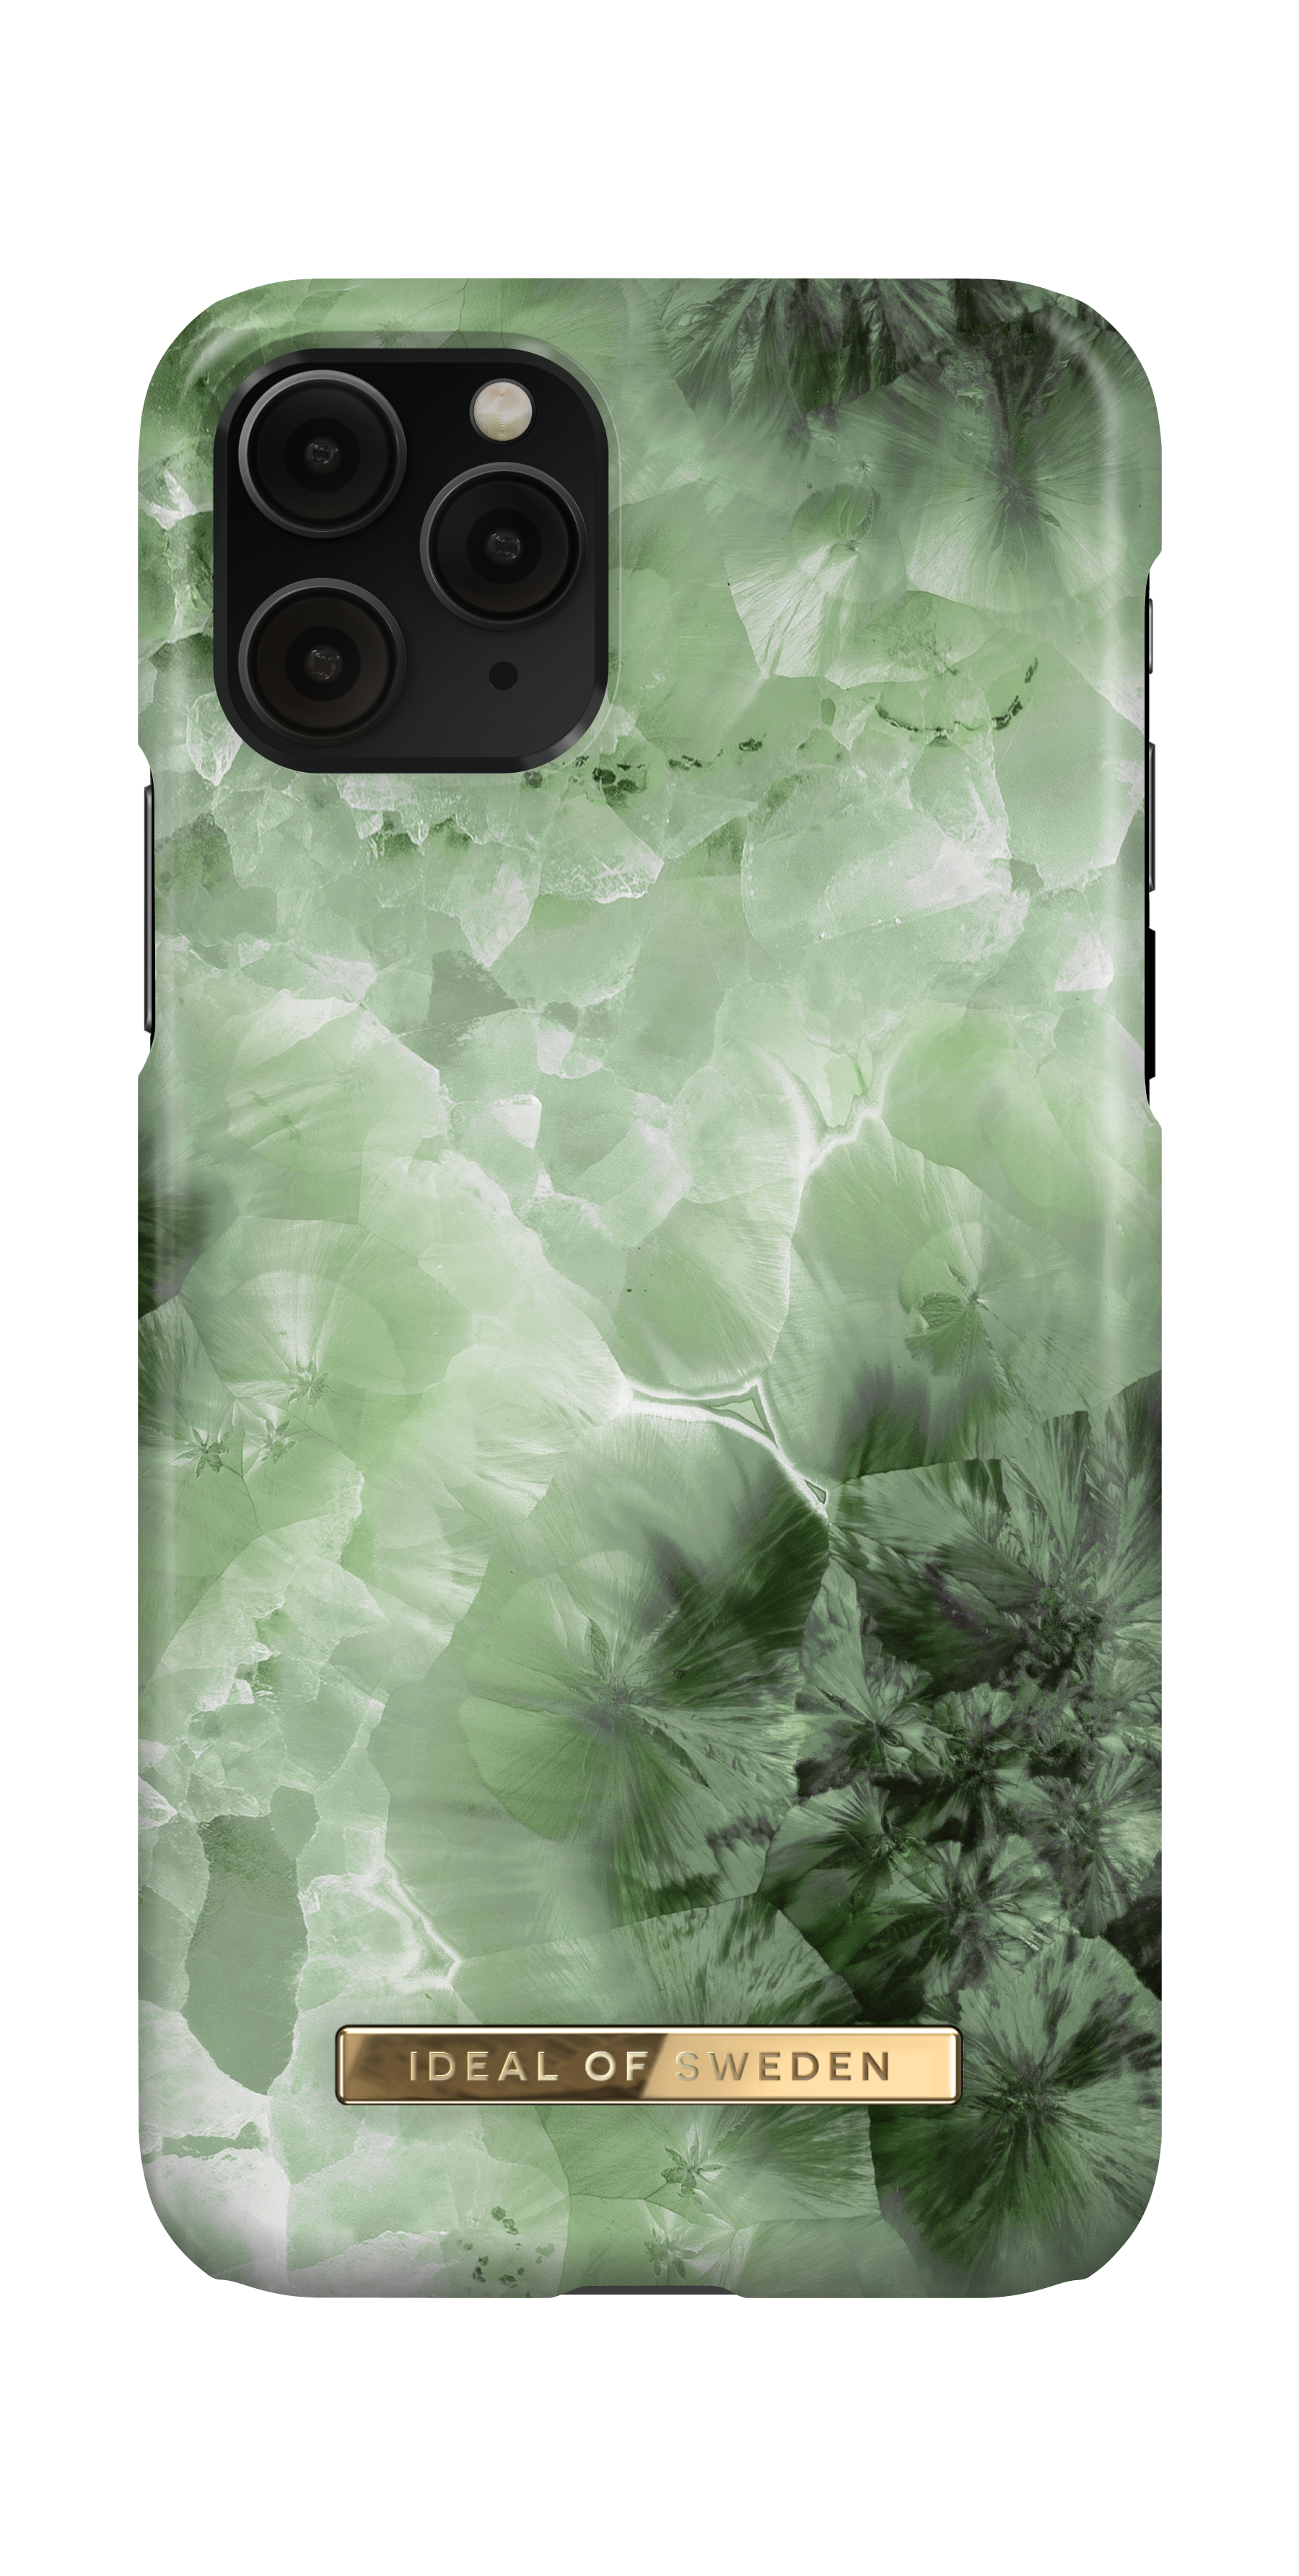 IDFCAW20-1958-230, Green iPhone Backcover, Sky iPhone X, Apple, IDEAL SWEDEN Crystal XS, Pro, 11 iPhone OF